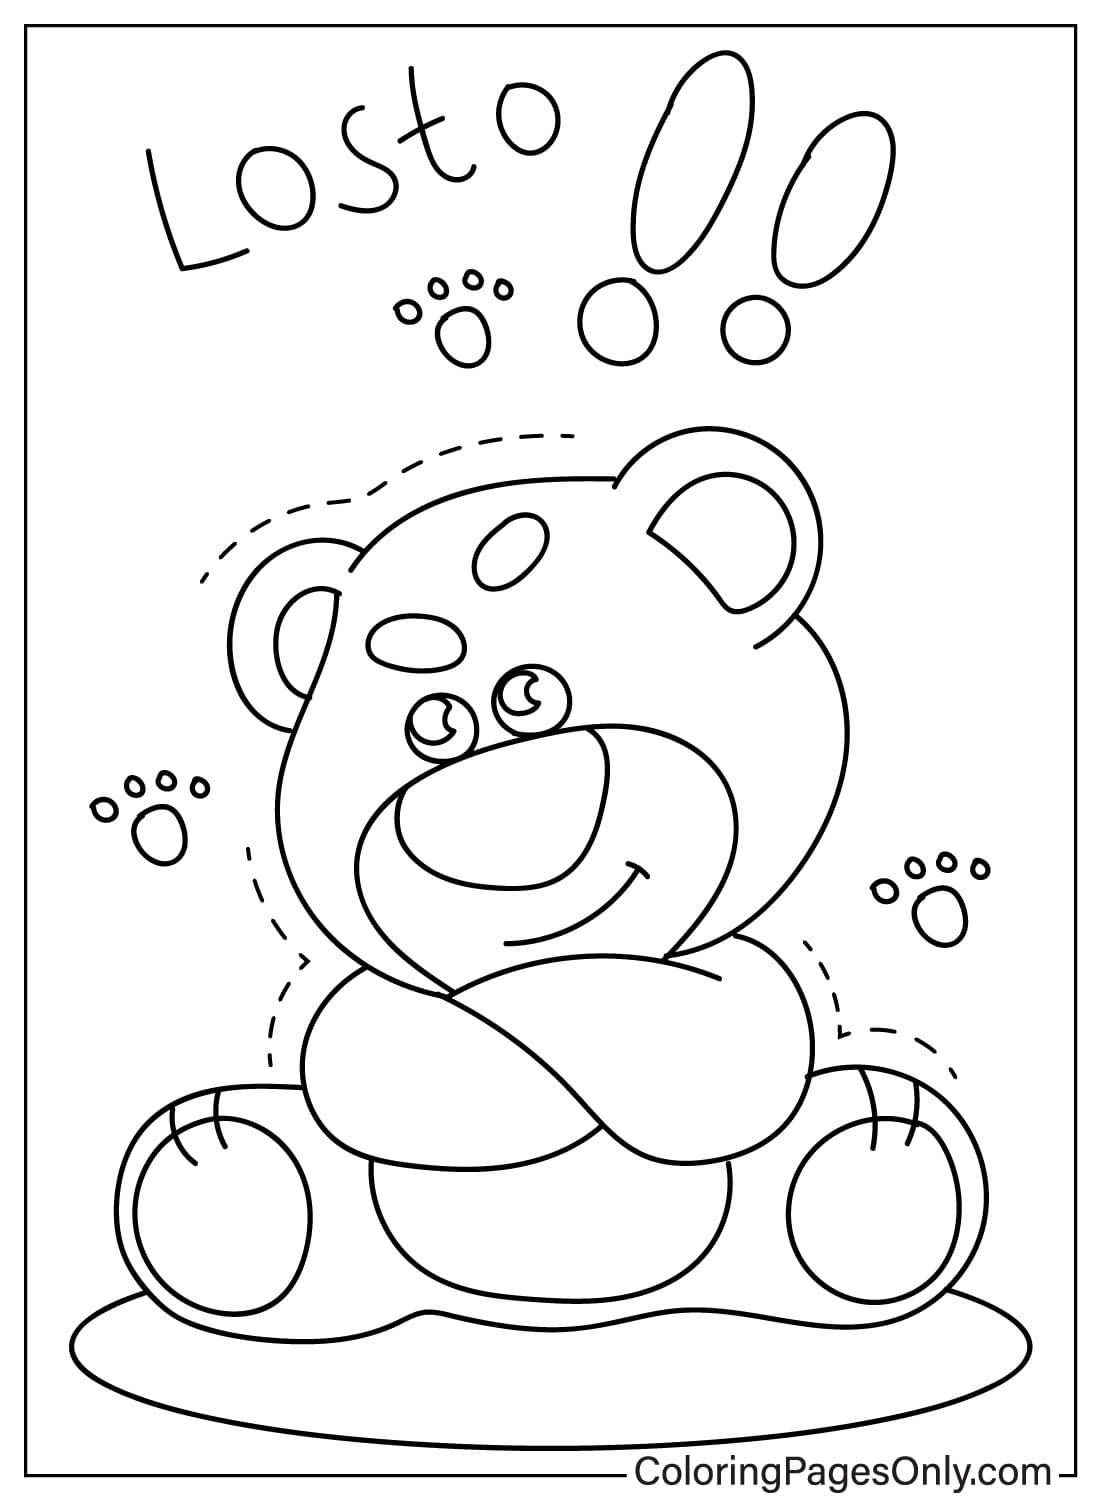 Pictures Lotso Bear Coloring Page from Lotso Bear